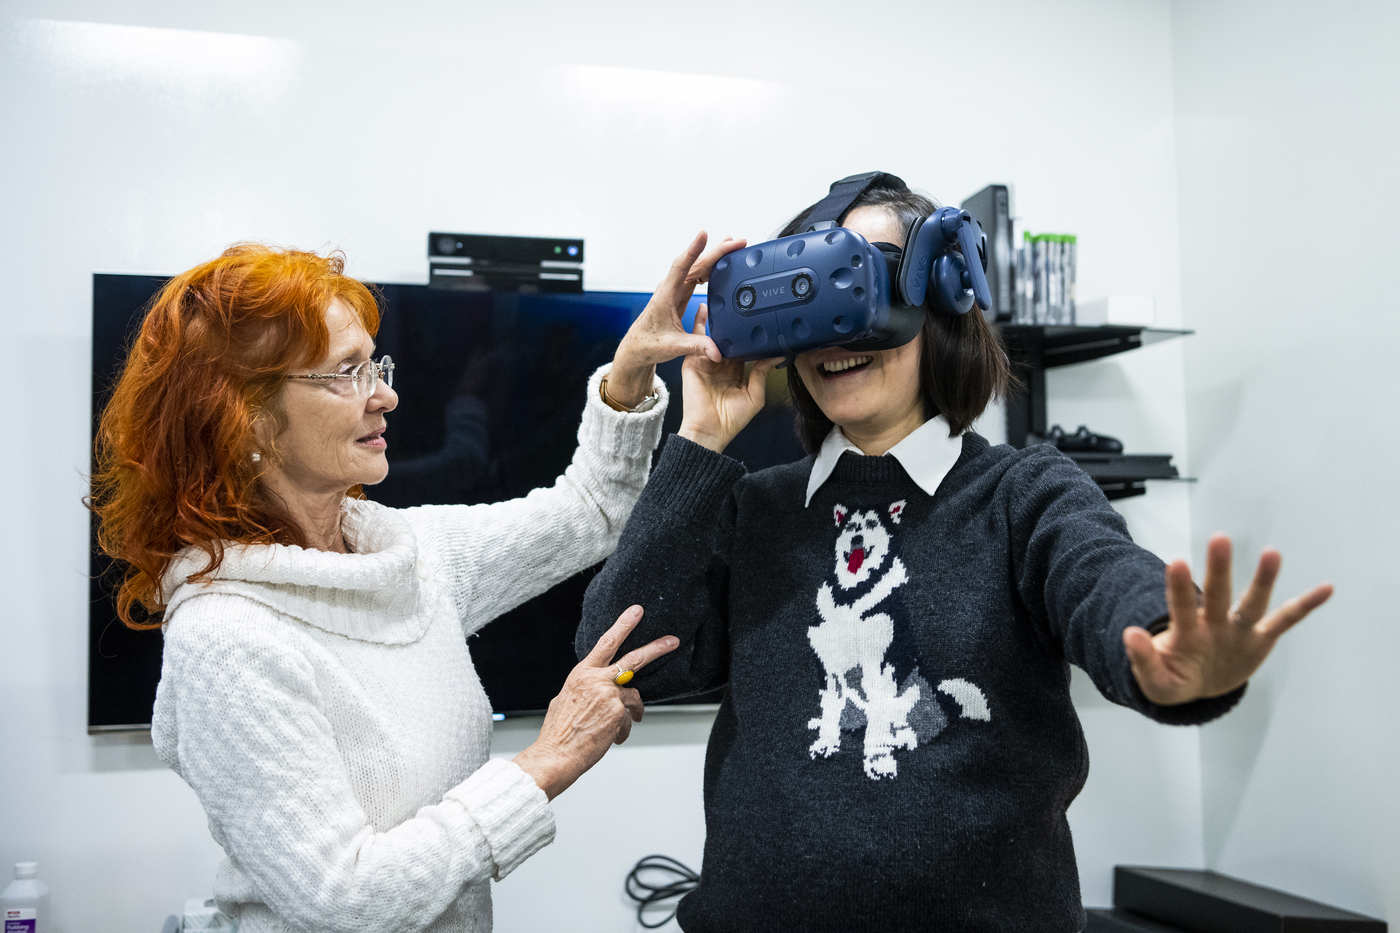 Two professors play an interactive video game with a VR headset